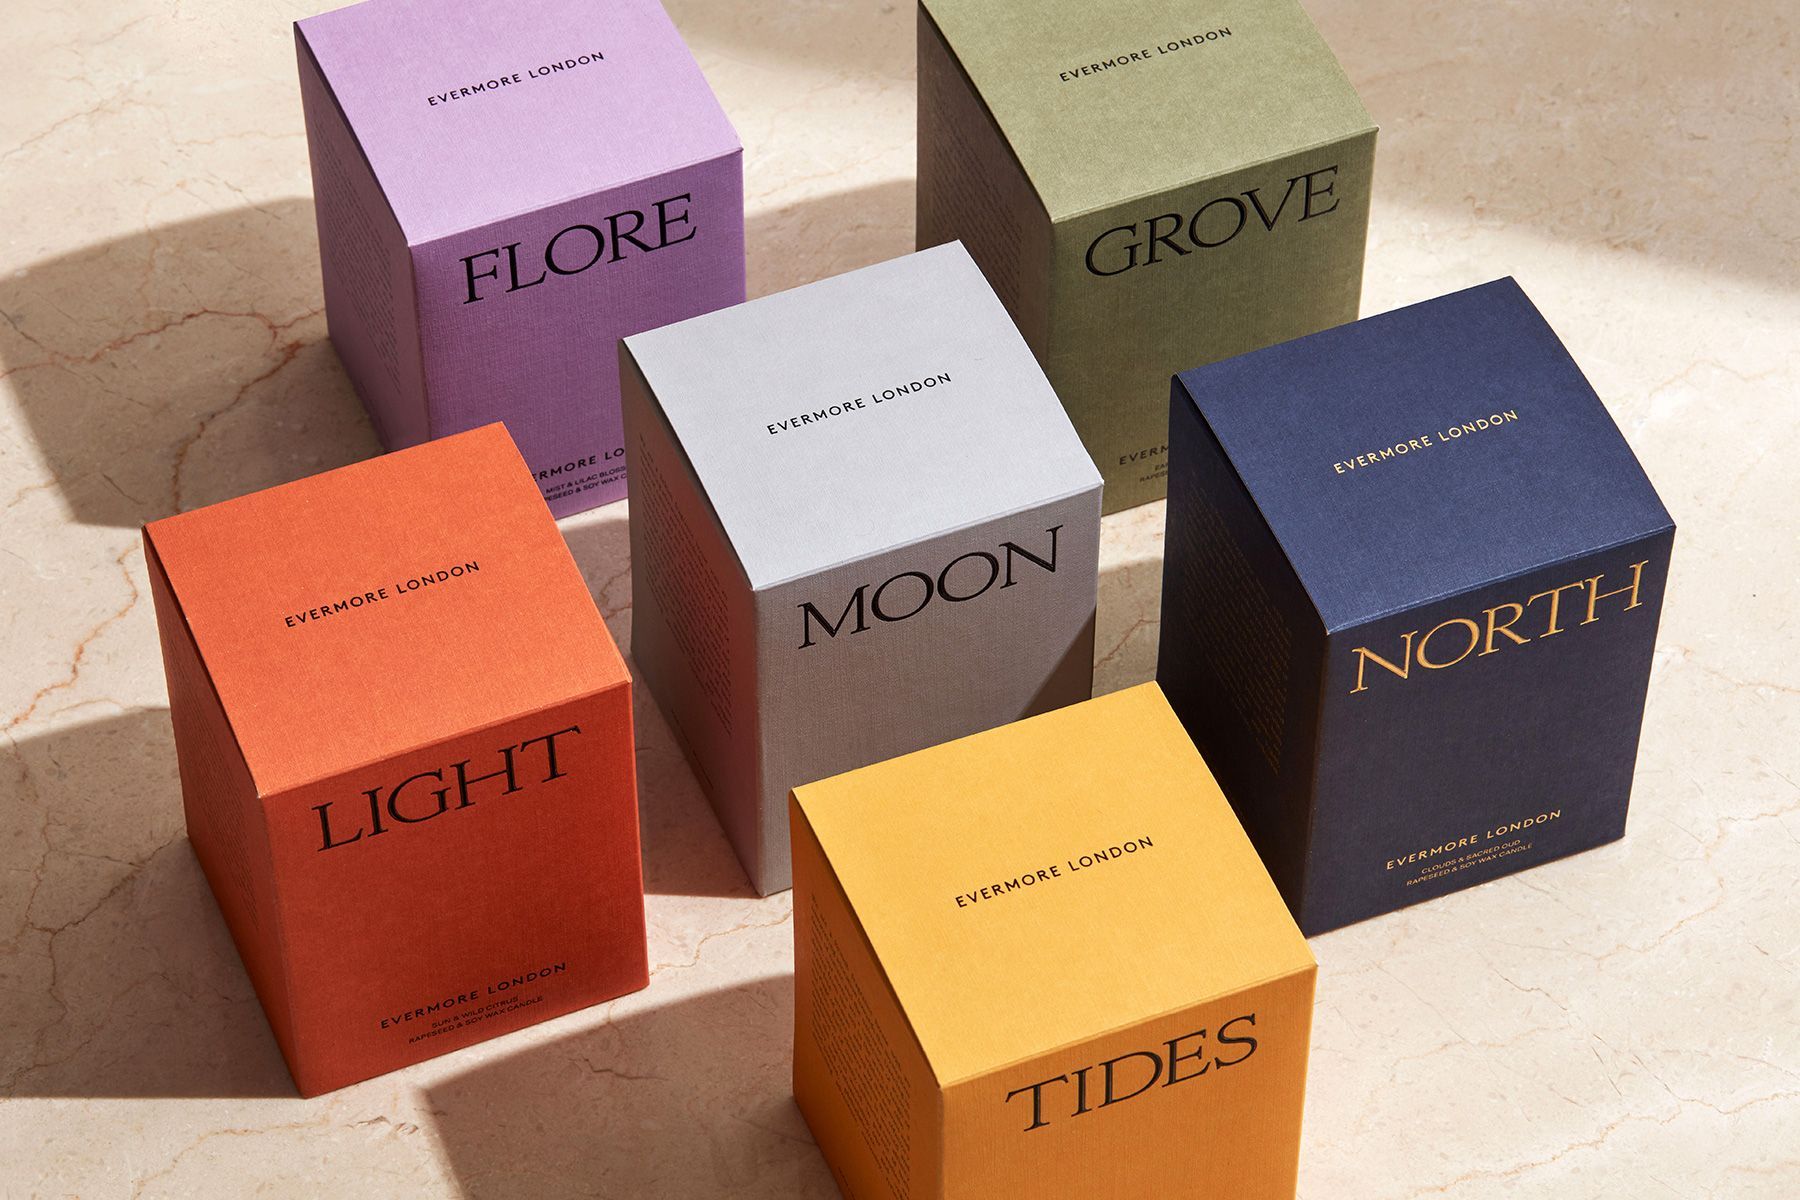 Evermore London by POST — The Brand Identity - Evermore London by POST — The Brand Identity -   18 beauty Design packaging ideas